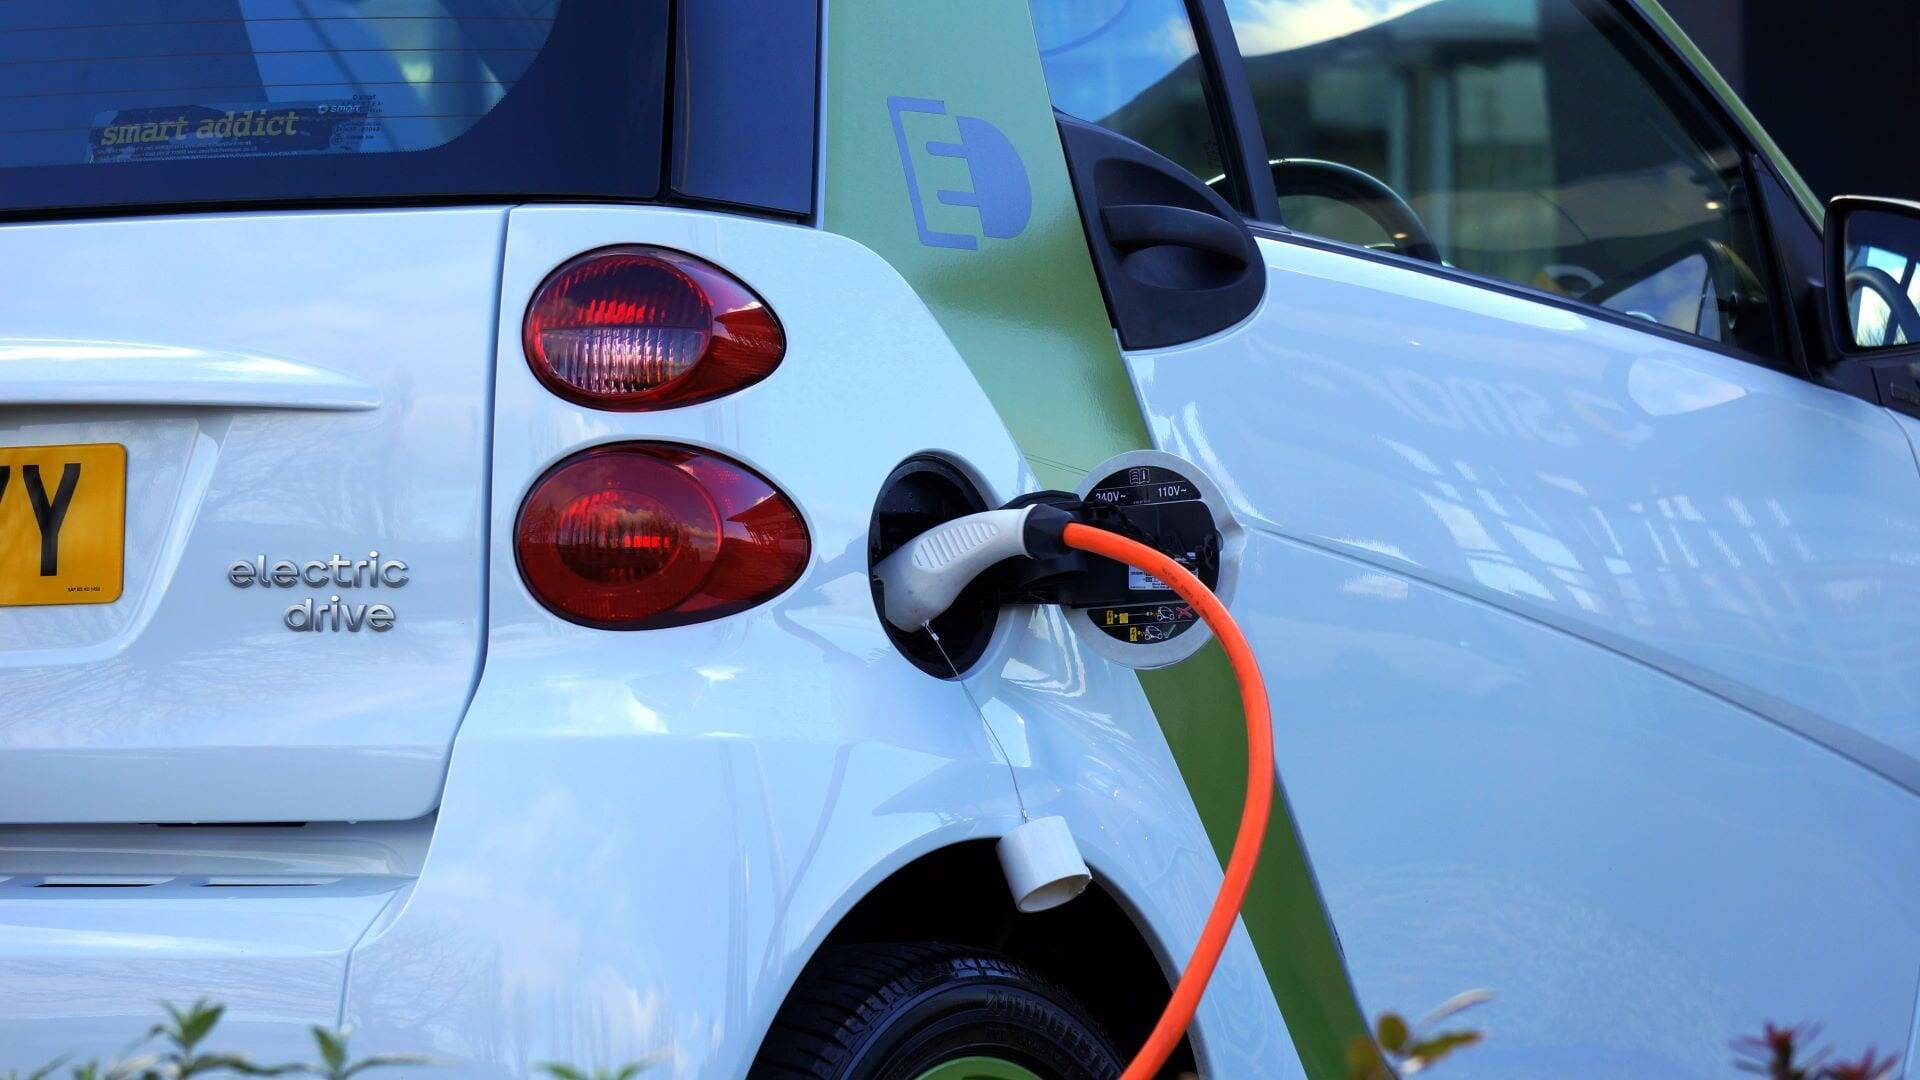 Streamlined permitting rules for EV chargepoint installations